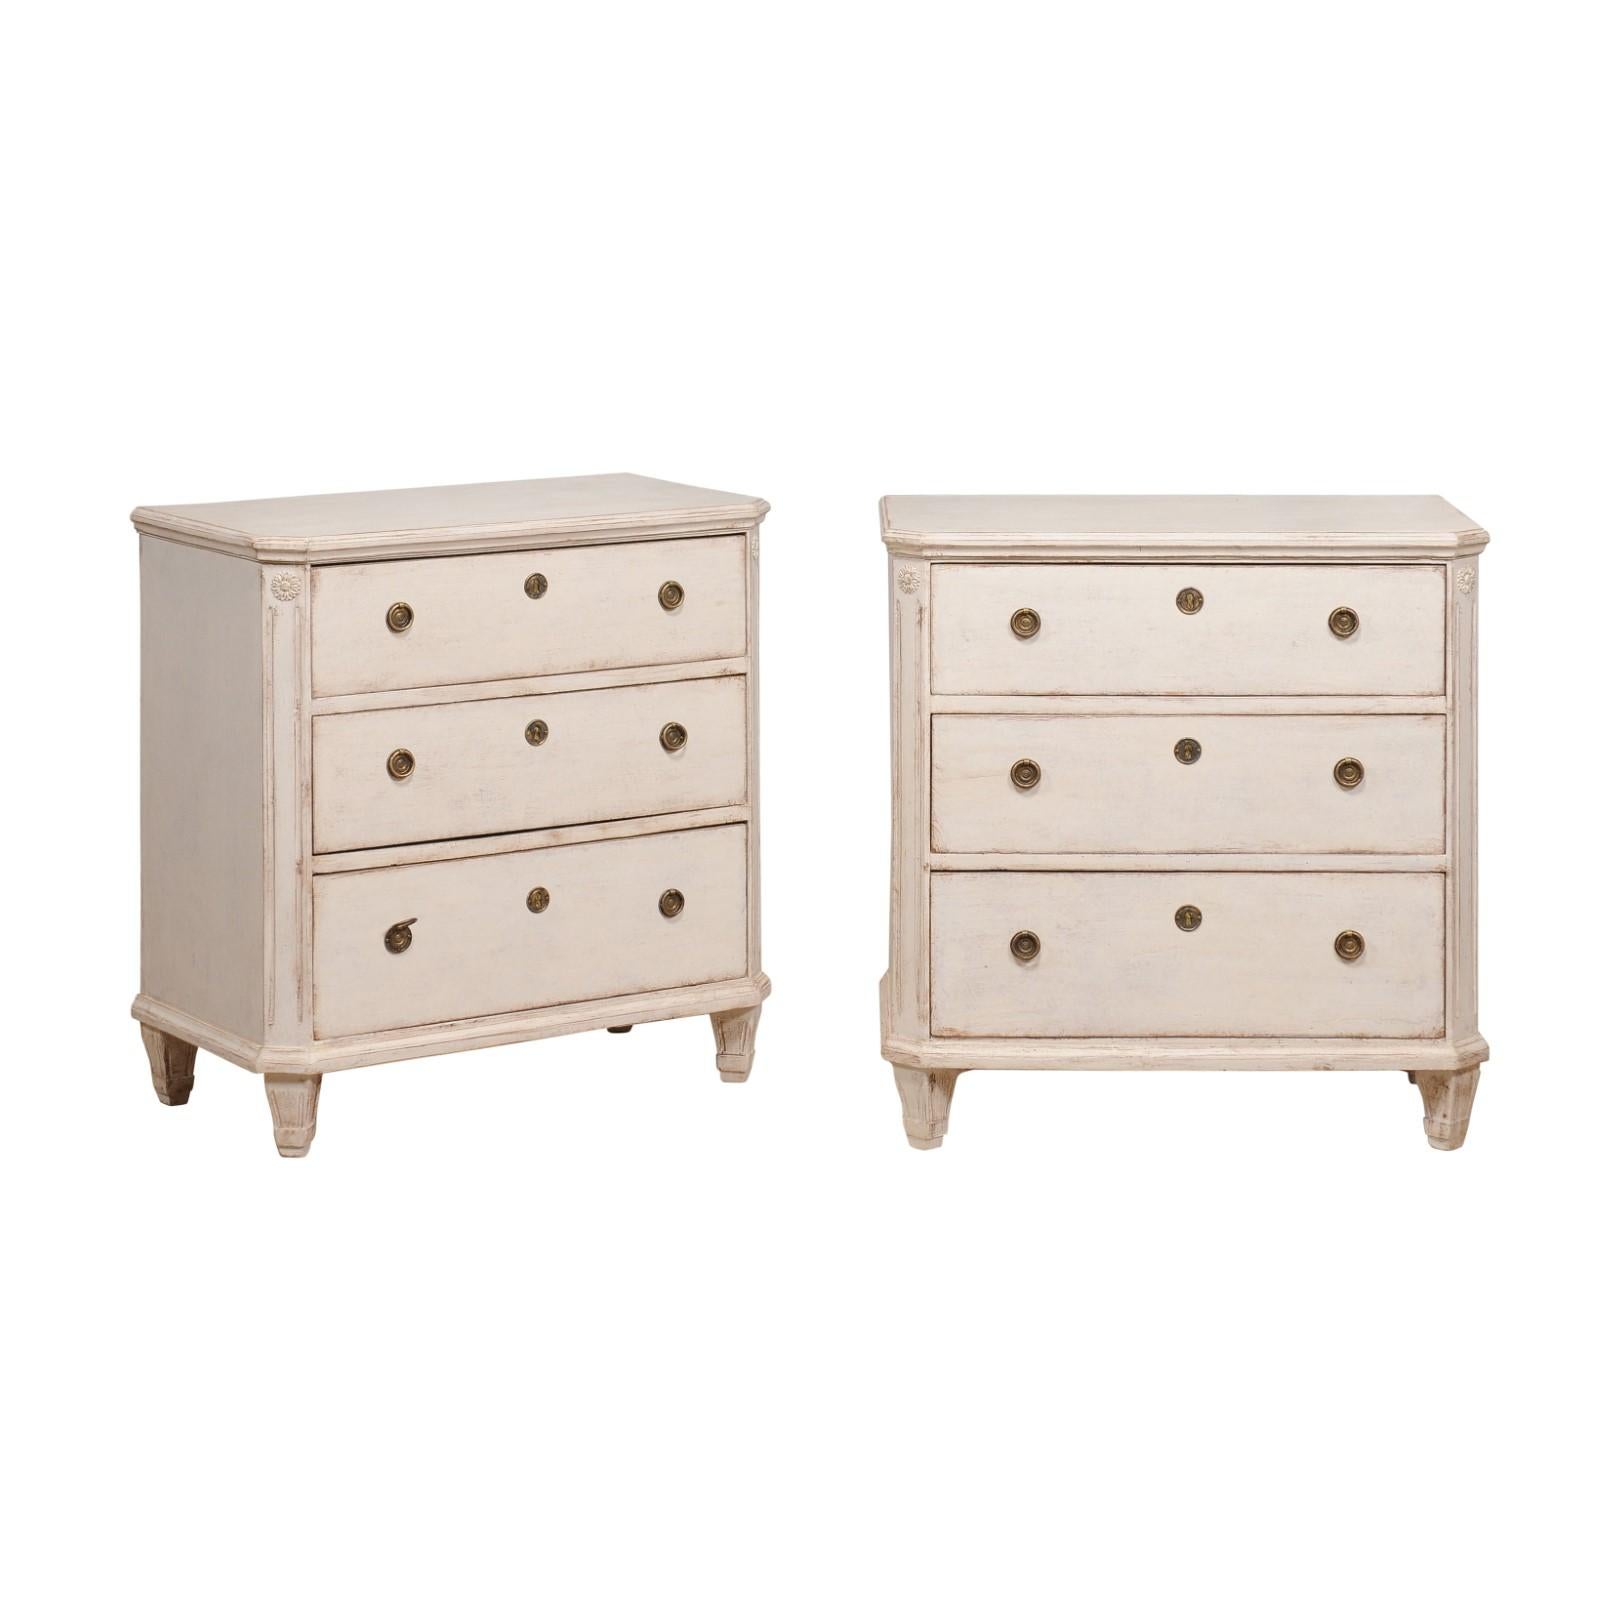 A pair of Swedish Gustavian style chests from the 19th century with off white / beige painted finish, three drawers, carved rosettes and tapered feet. Immerse yourself in the effortless grandeur of this 19th-century pair of Swedish Gustavian style